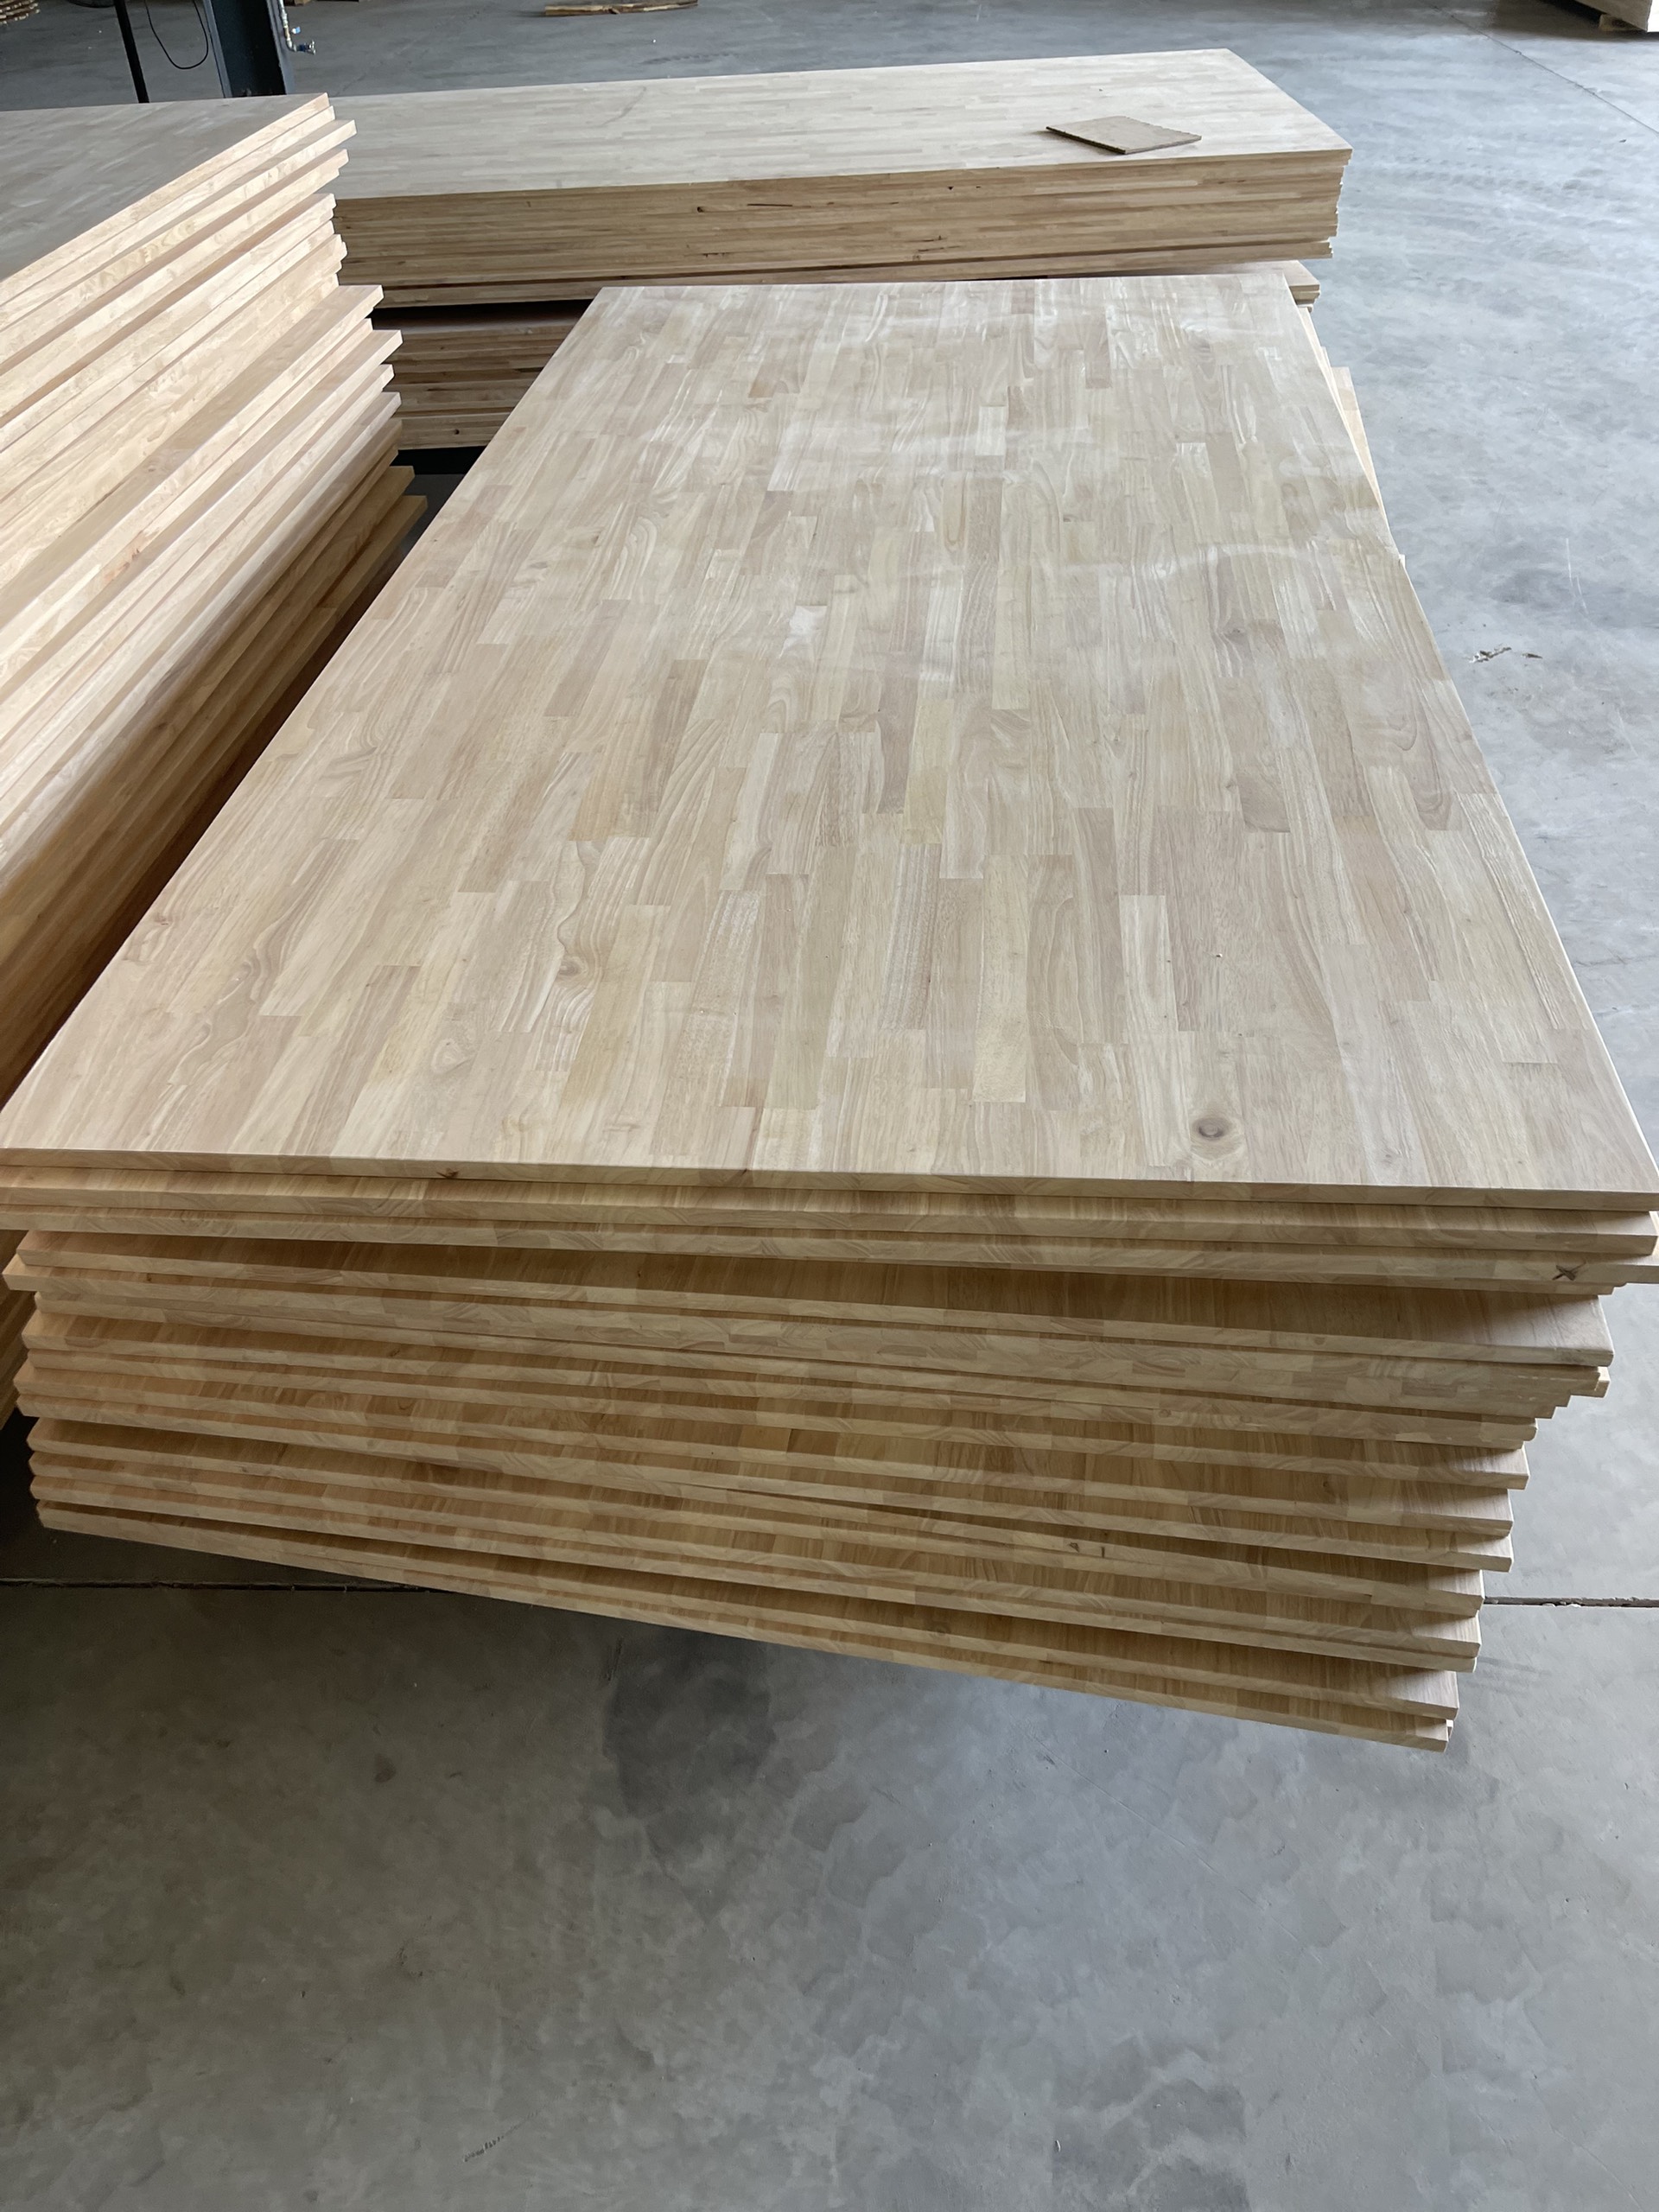 Rubber Joint Filler Board Wood Fast Delivery School Total Solution For Facilities Furniture For Decoration Home Made In Vietnam